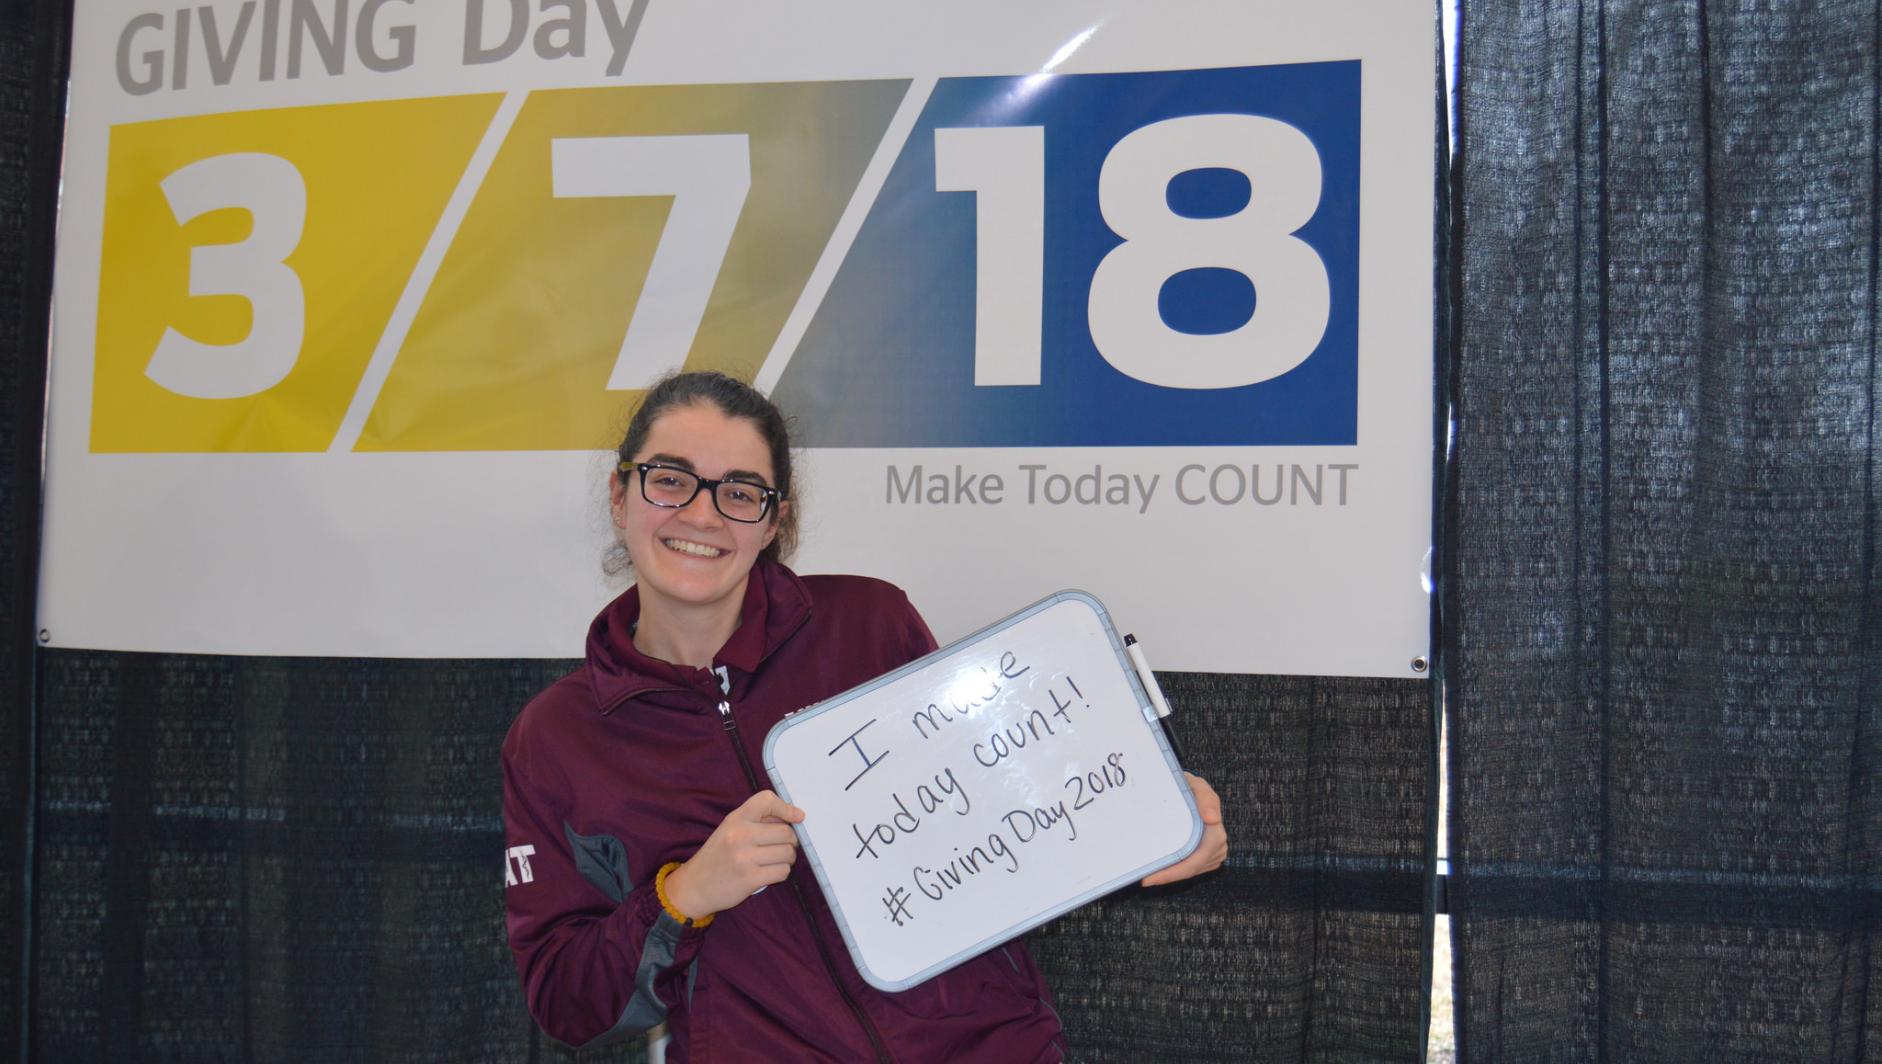 A student holds up a Giving Day sign.